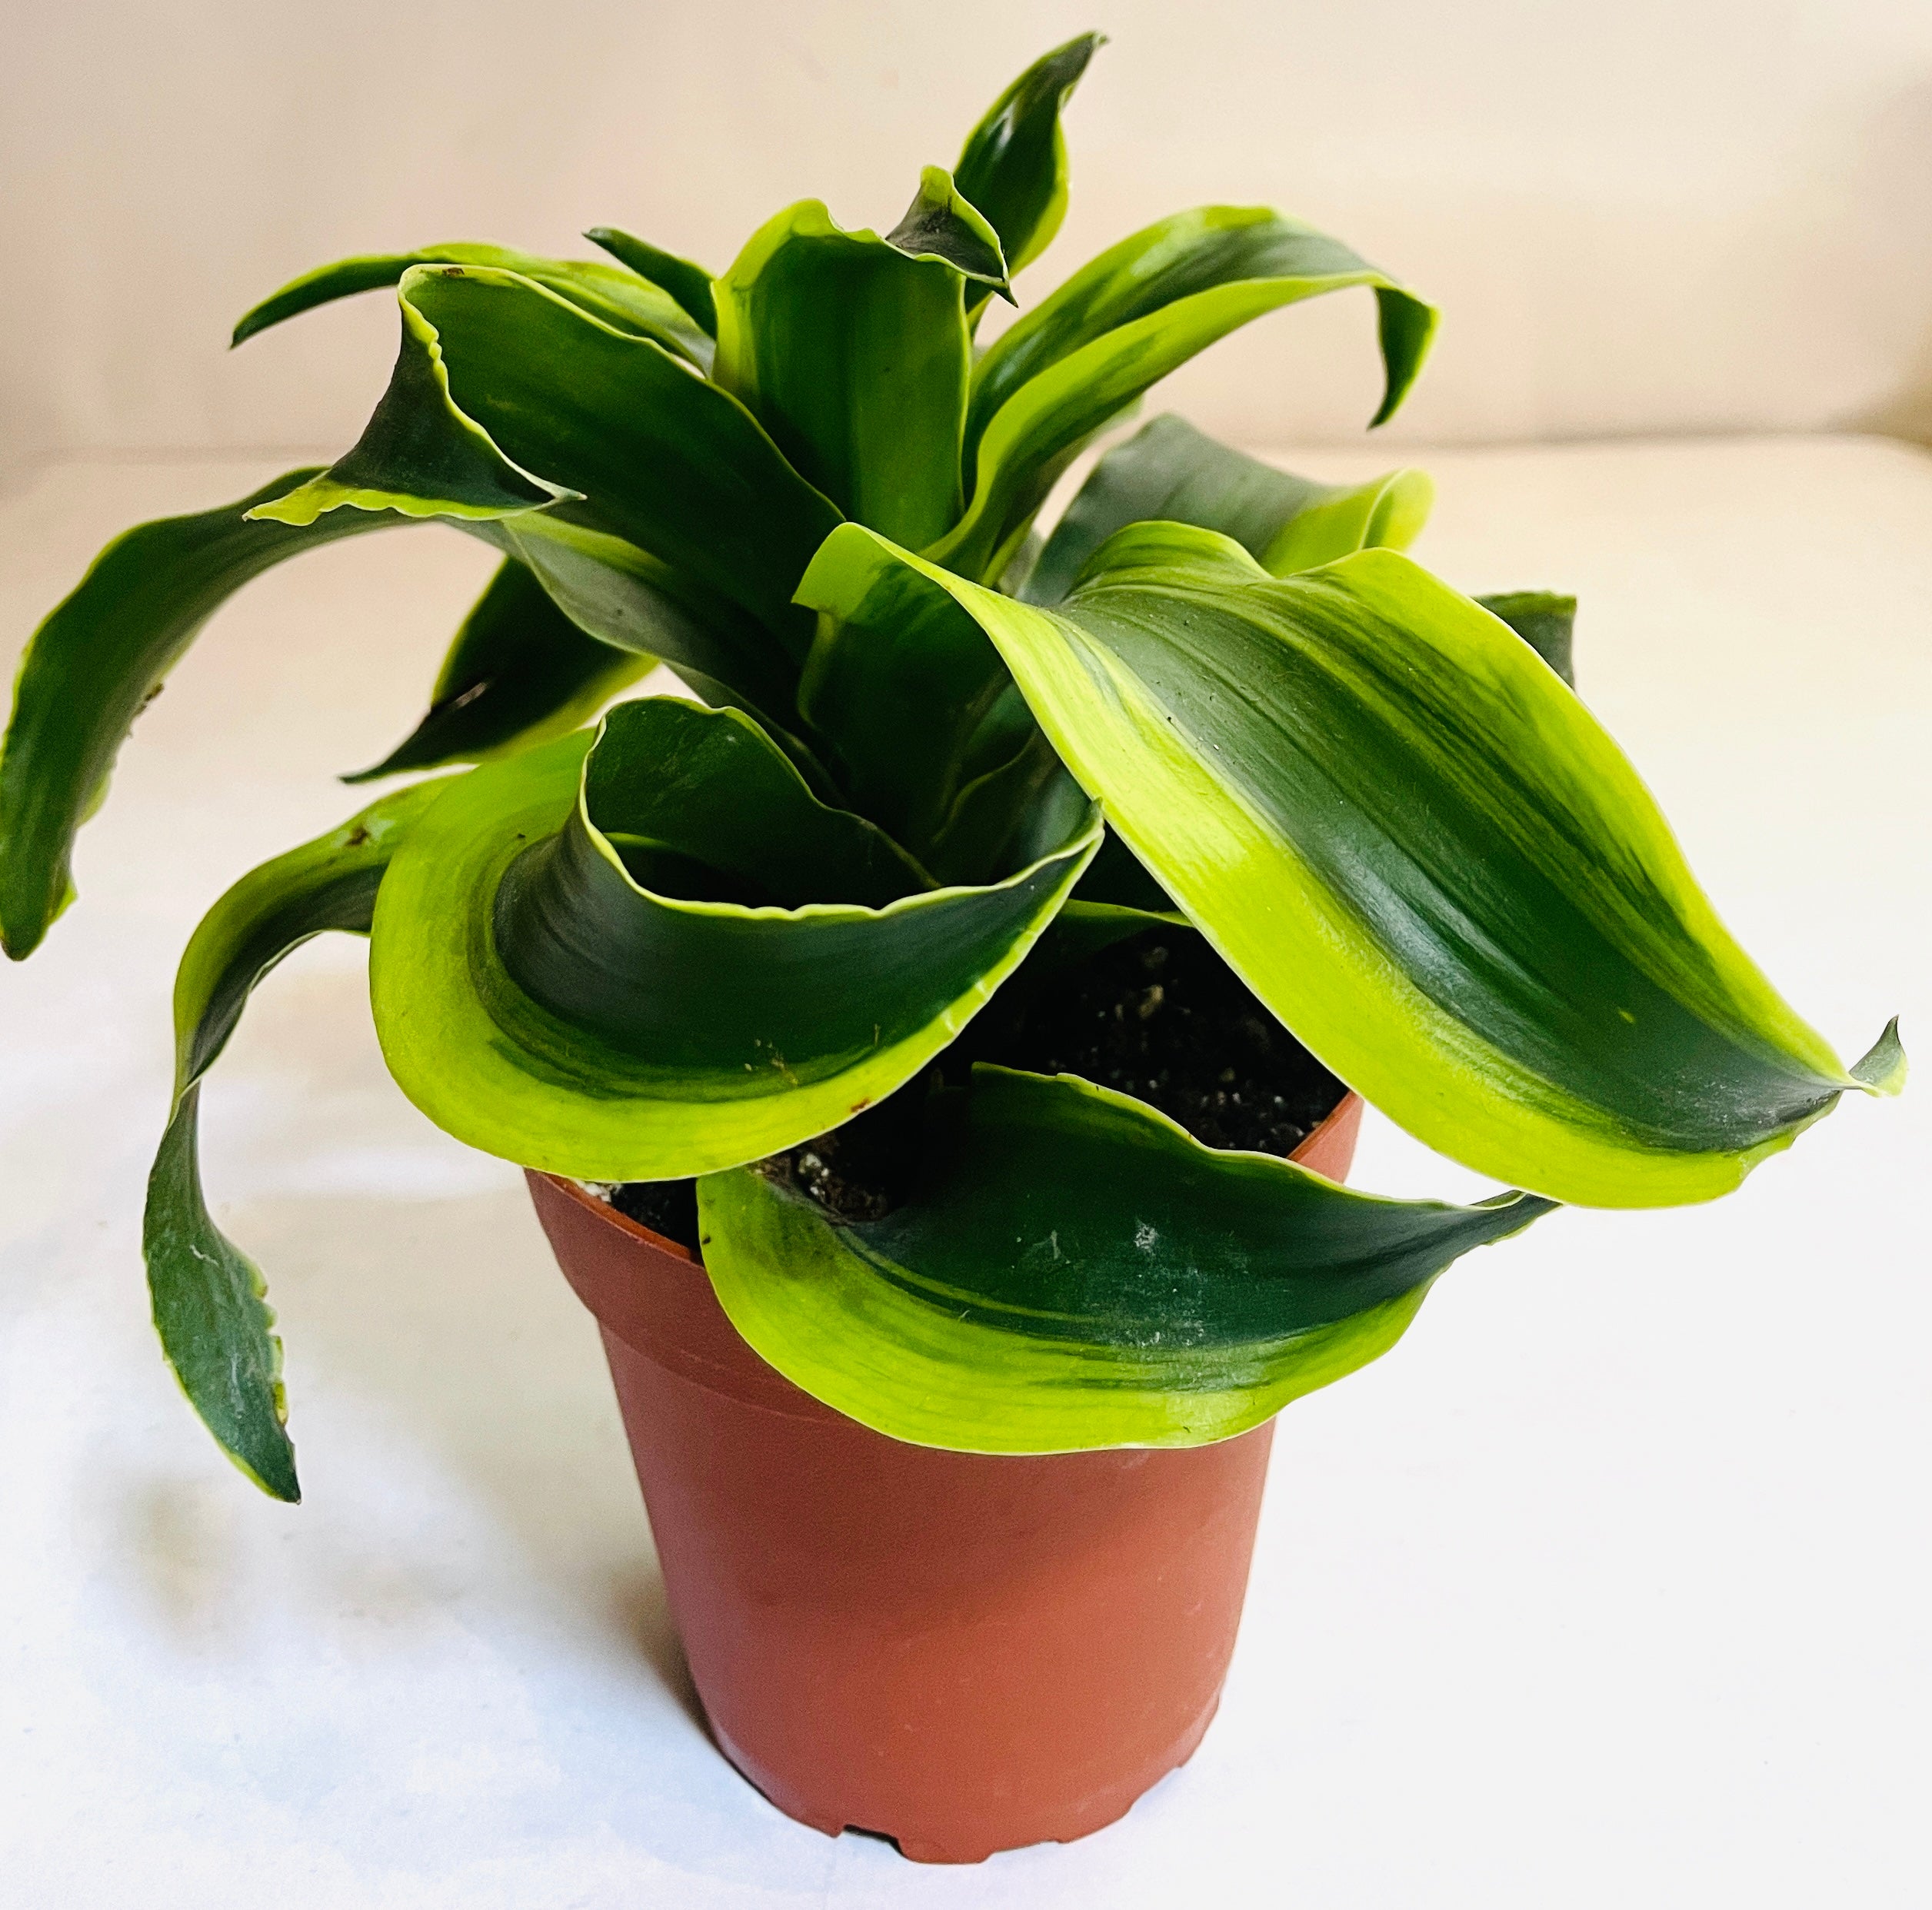 A leafy houseplant consisting of long blade-shaped green leaves with yellow margins, which twist around a center base to form a hurricane-like shape.